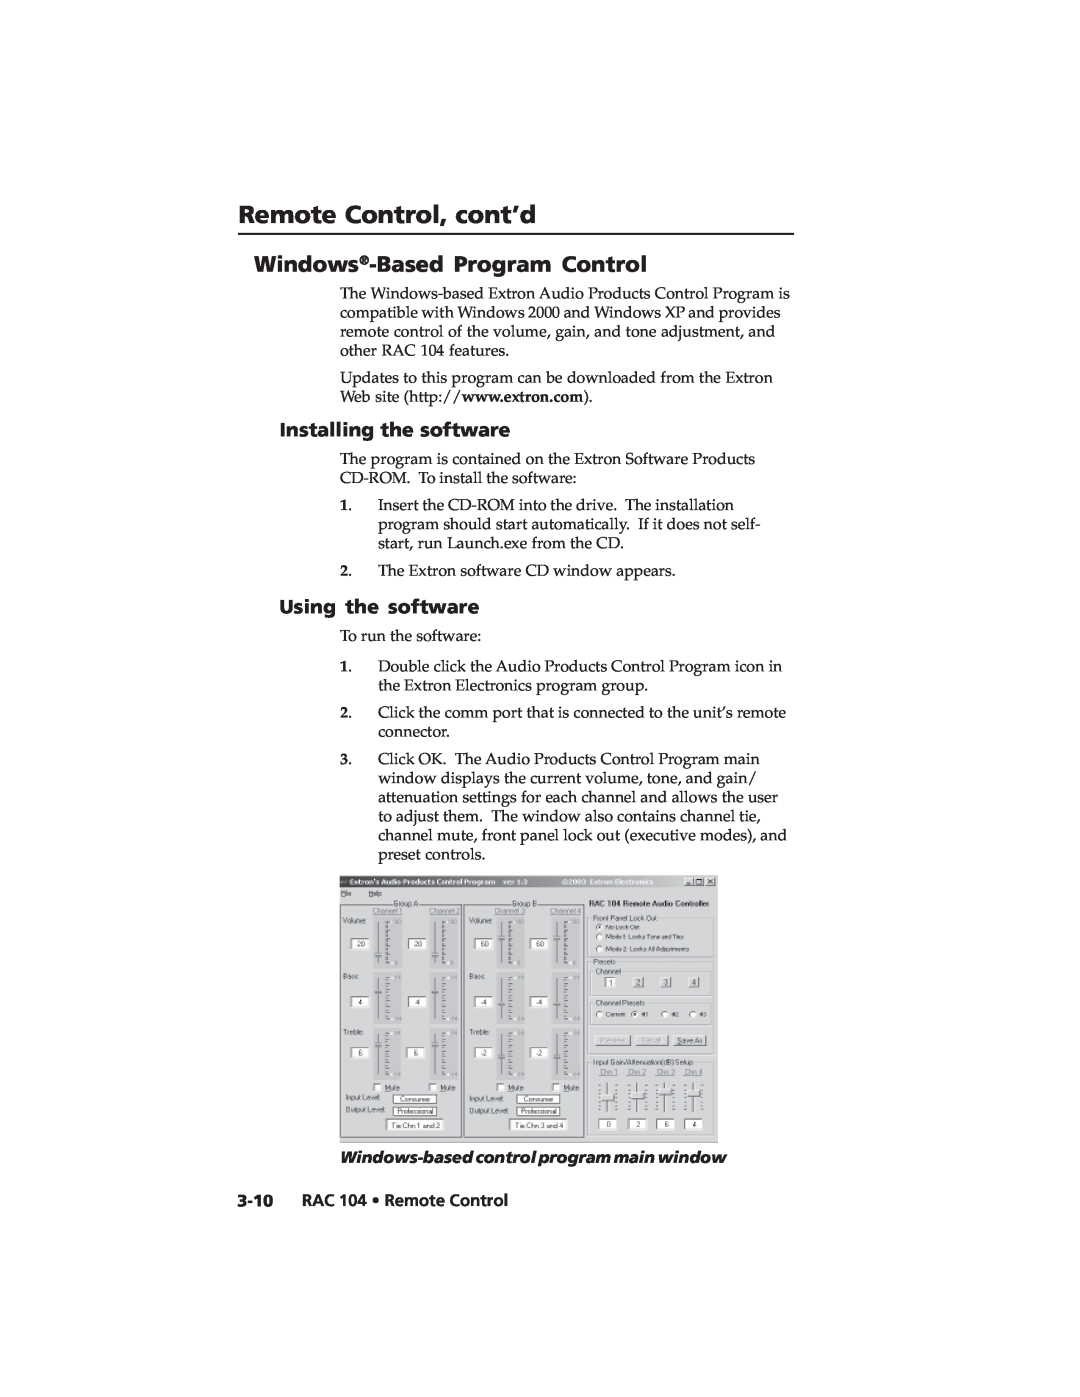 Extron electronic RAC 104 user manual Windows-BasedProgram Control, Installing the software, Using the software 